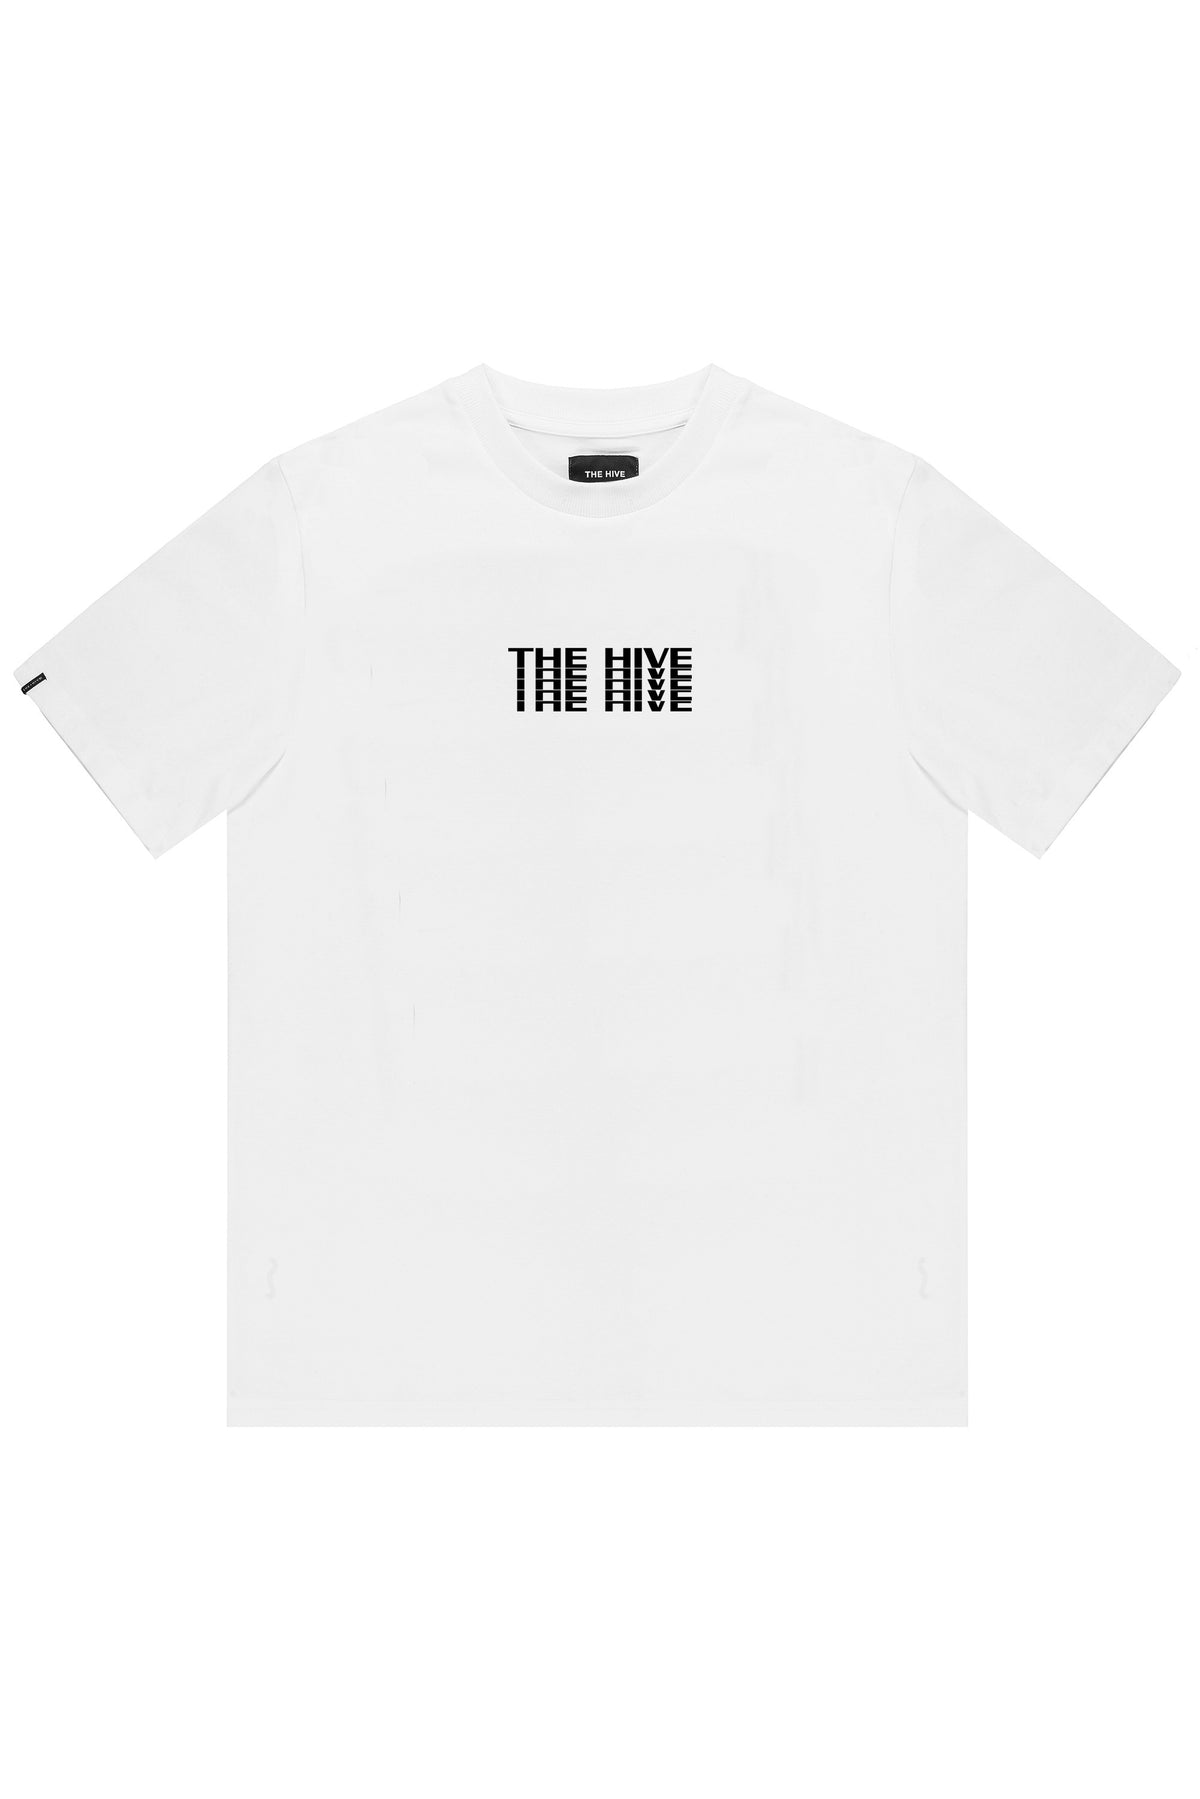 The Hive Clothing - Streetwear Clothing Brand